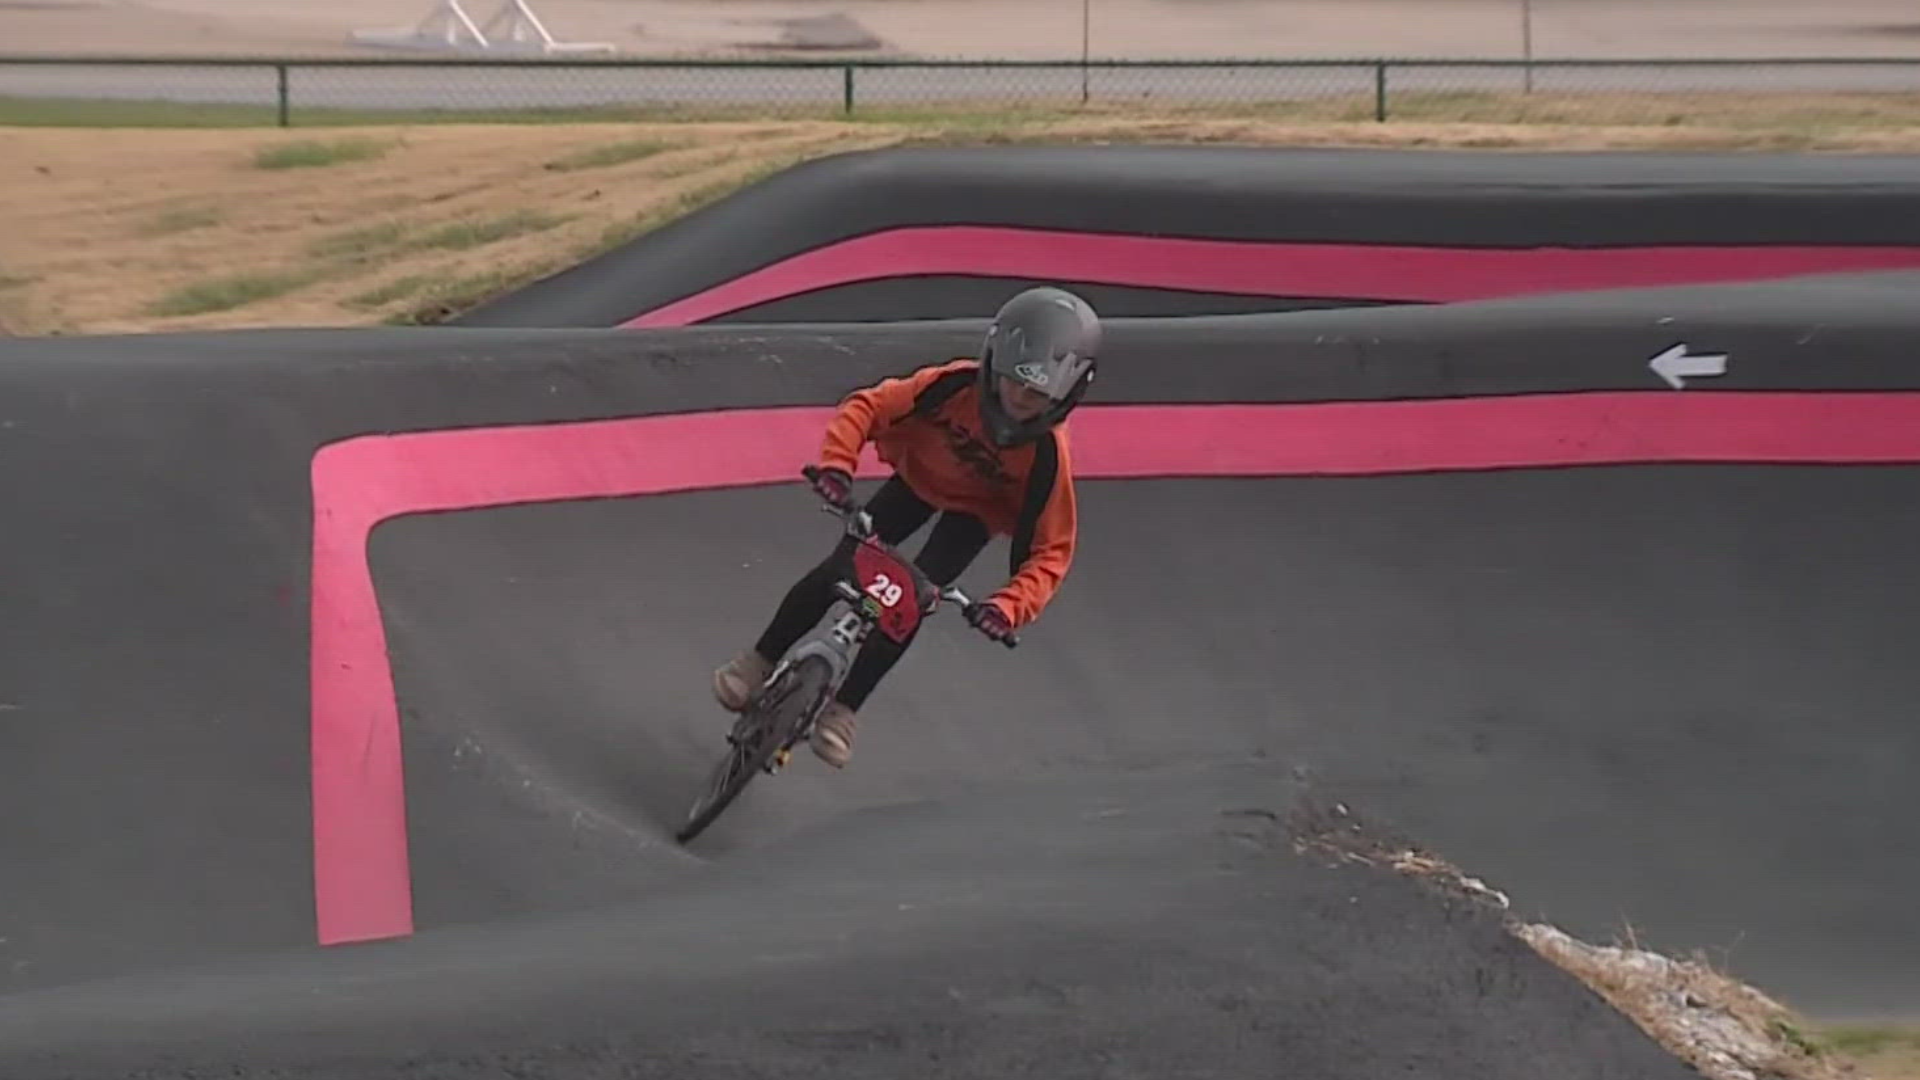 Runway Bike Park is teamed up with two other world-class pump tracks to host the Tao Pump Track Championships.